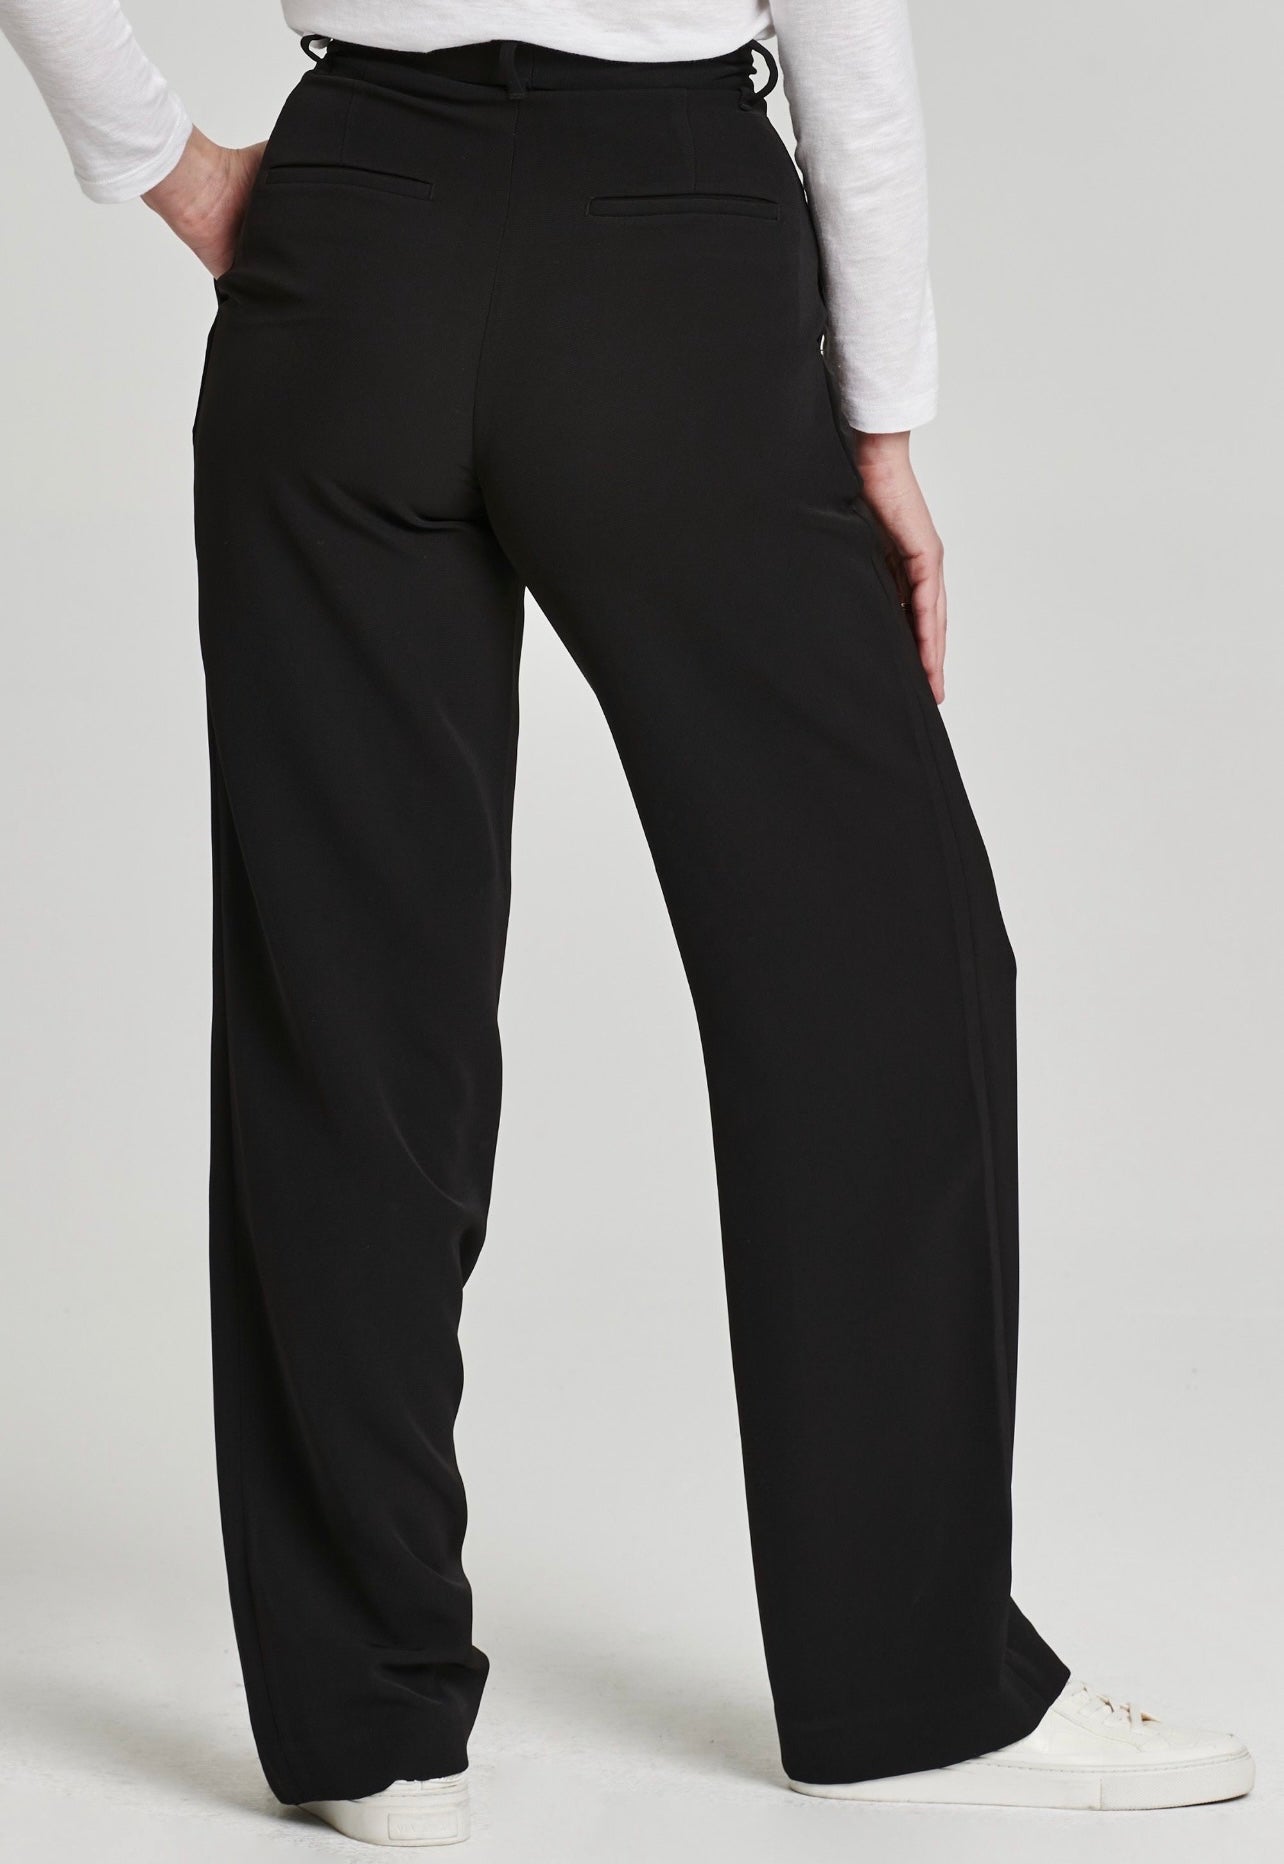 The Adelaide Pant